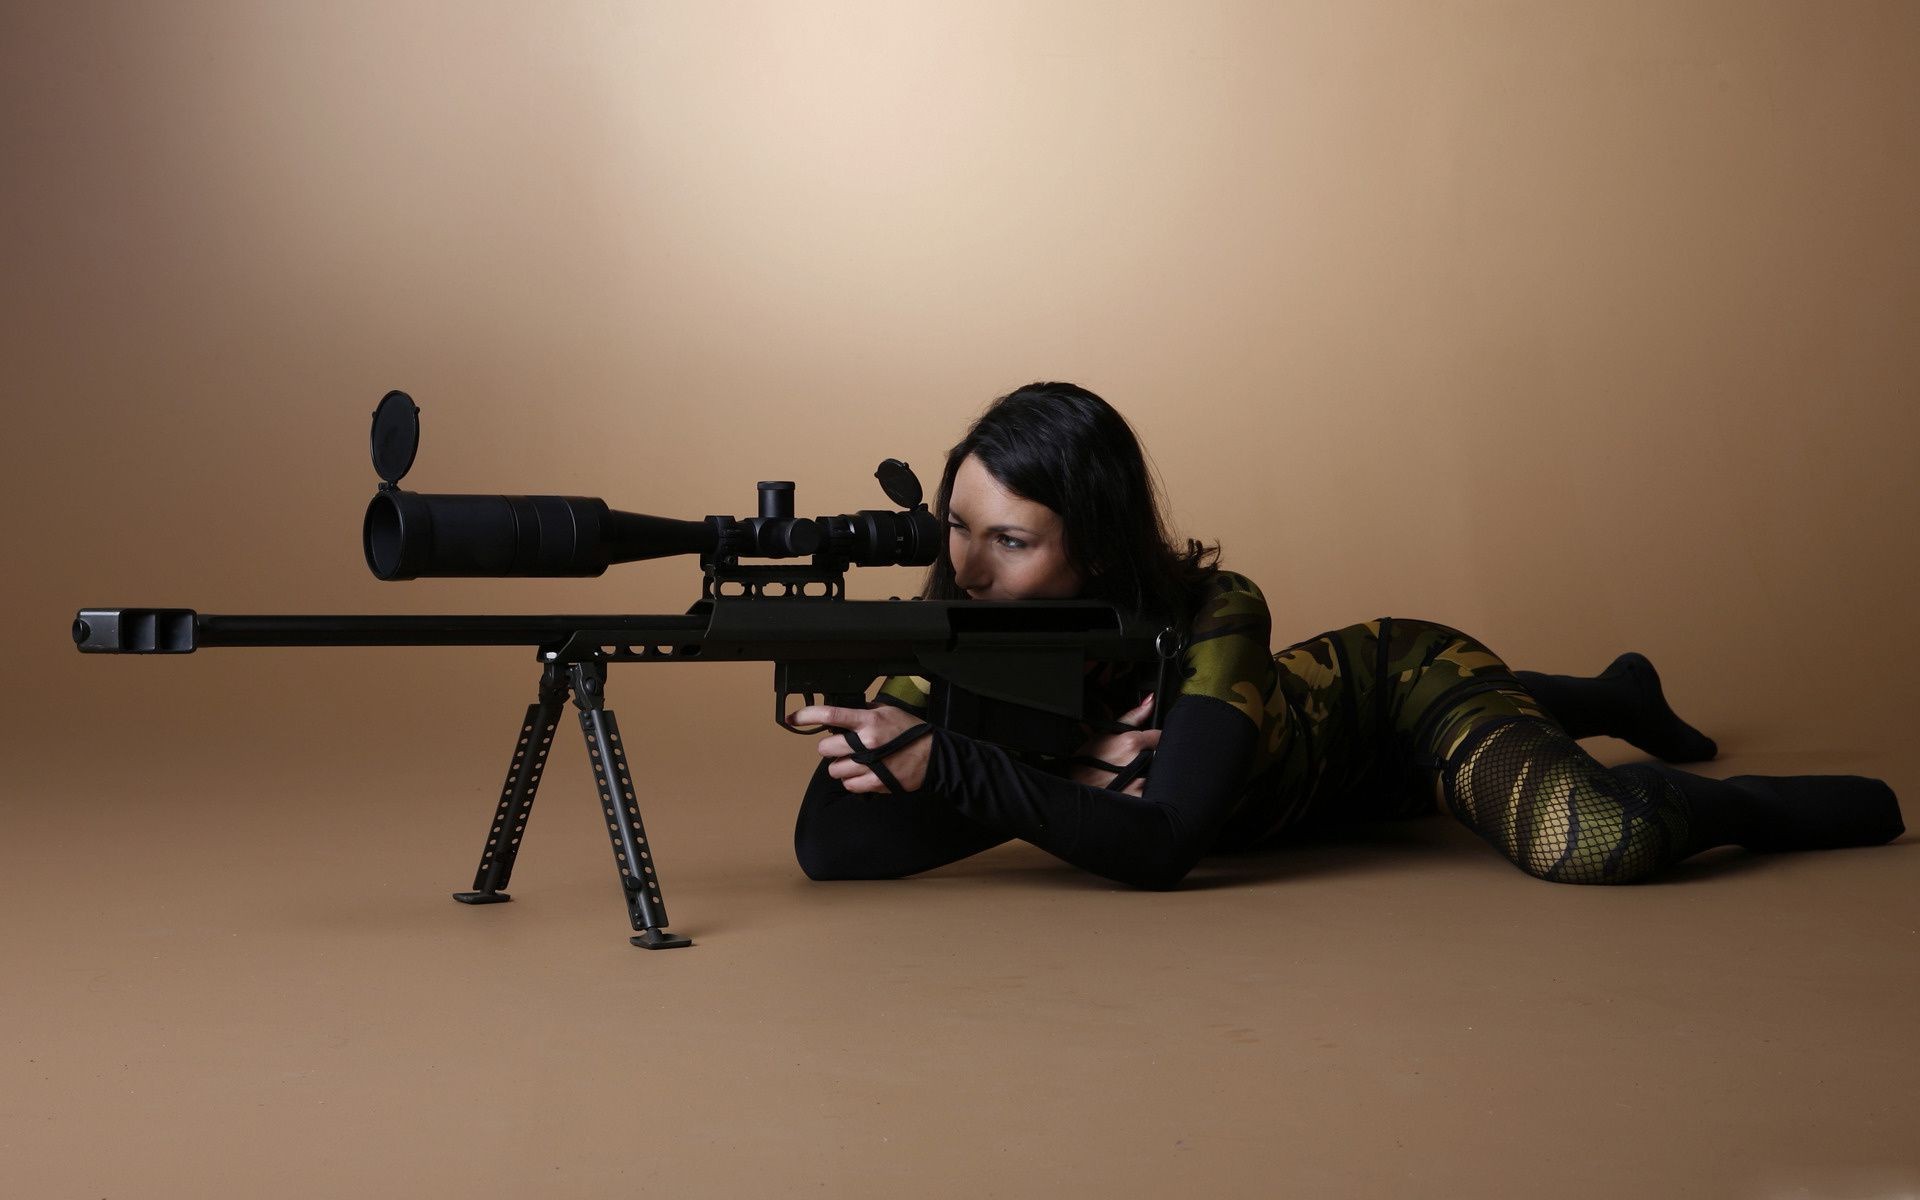 weapons and army gun weapon adult military war rifle battle offense army one girl force pistol portrait soldier